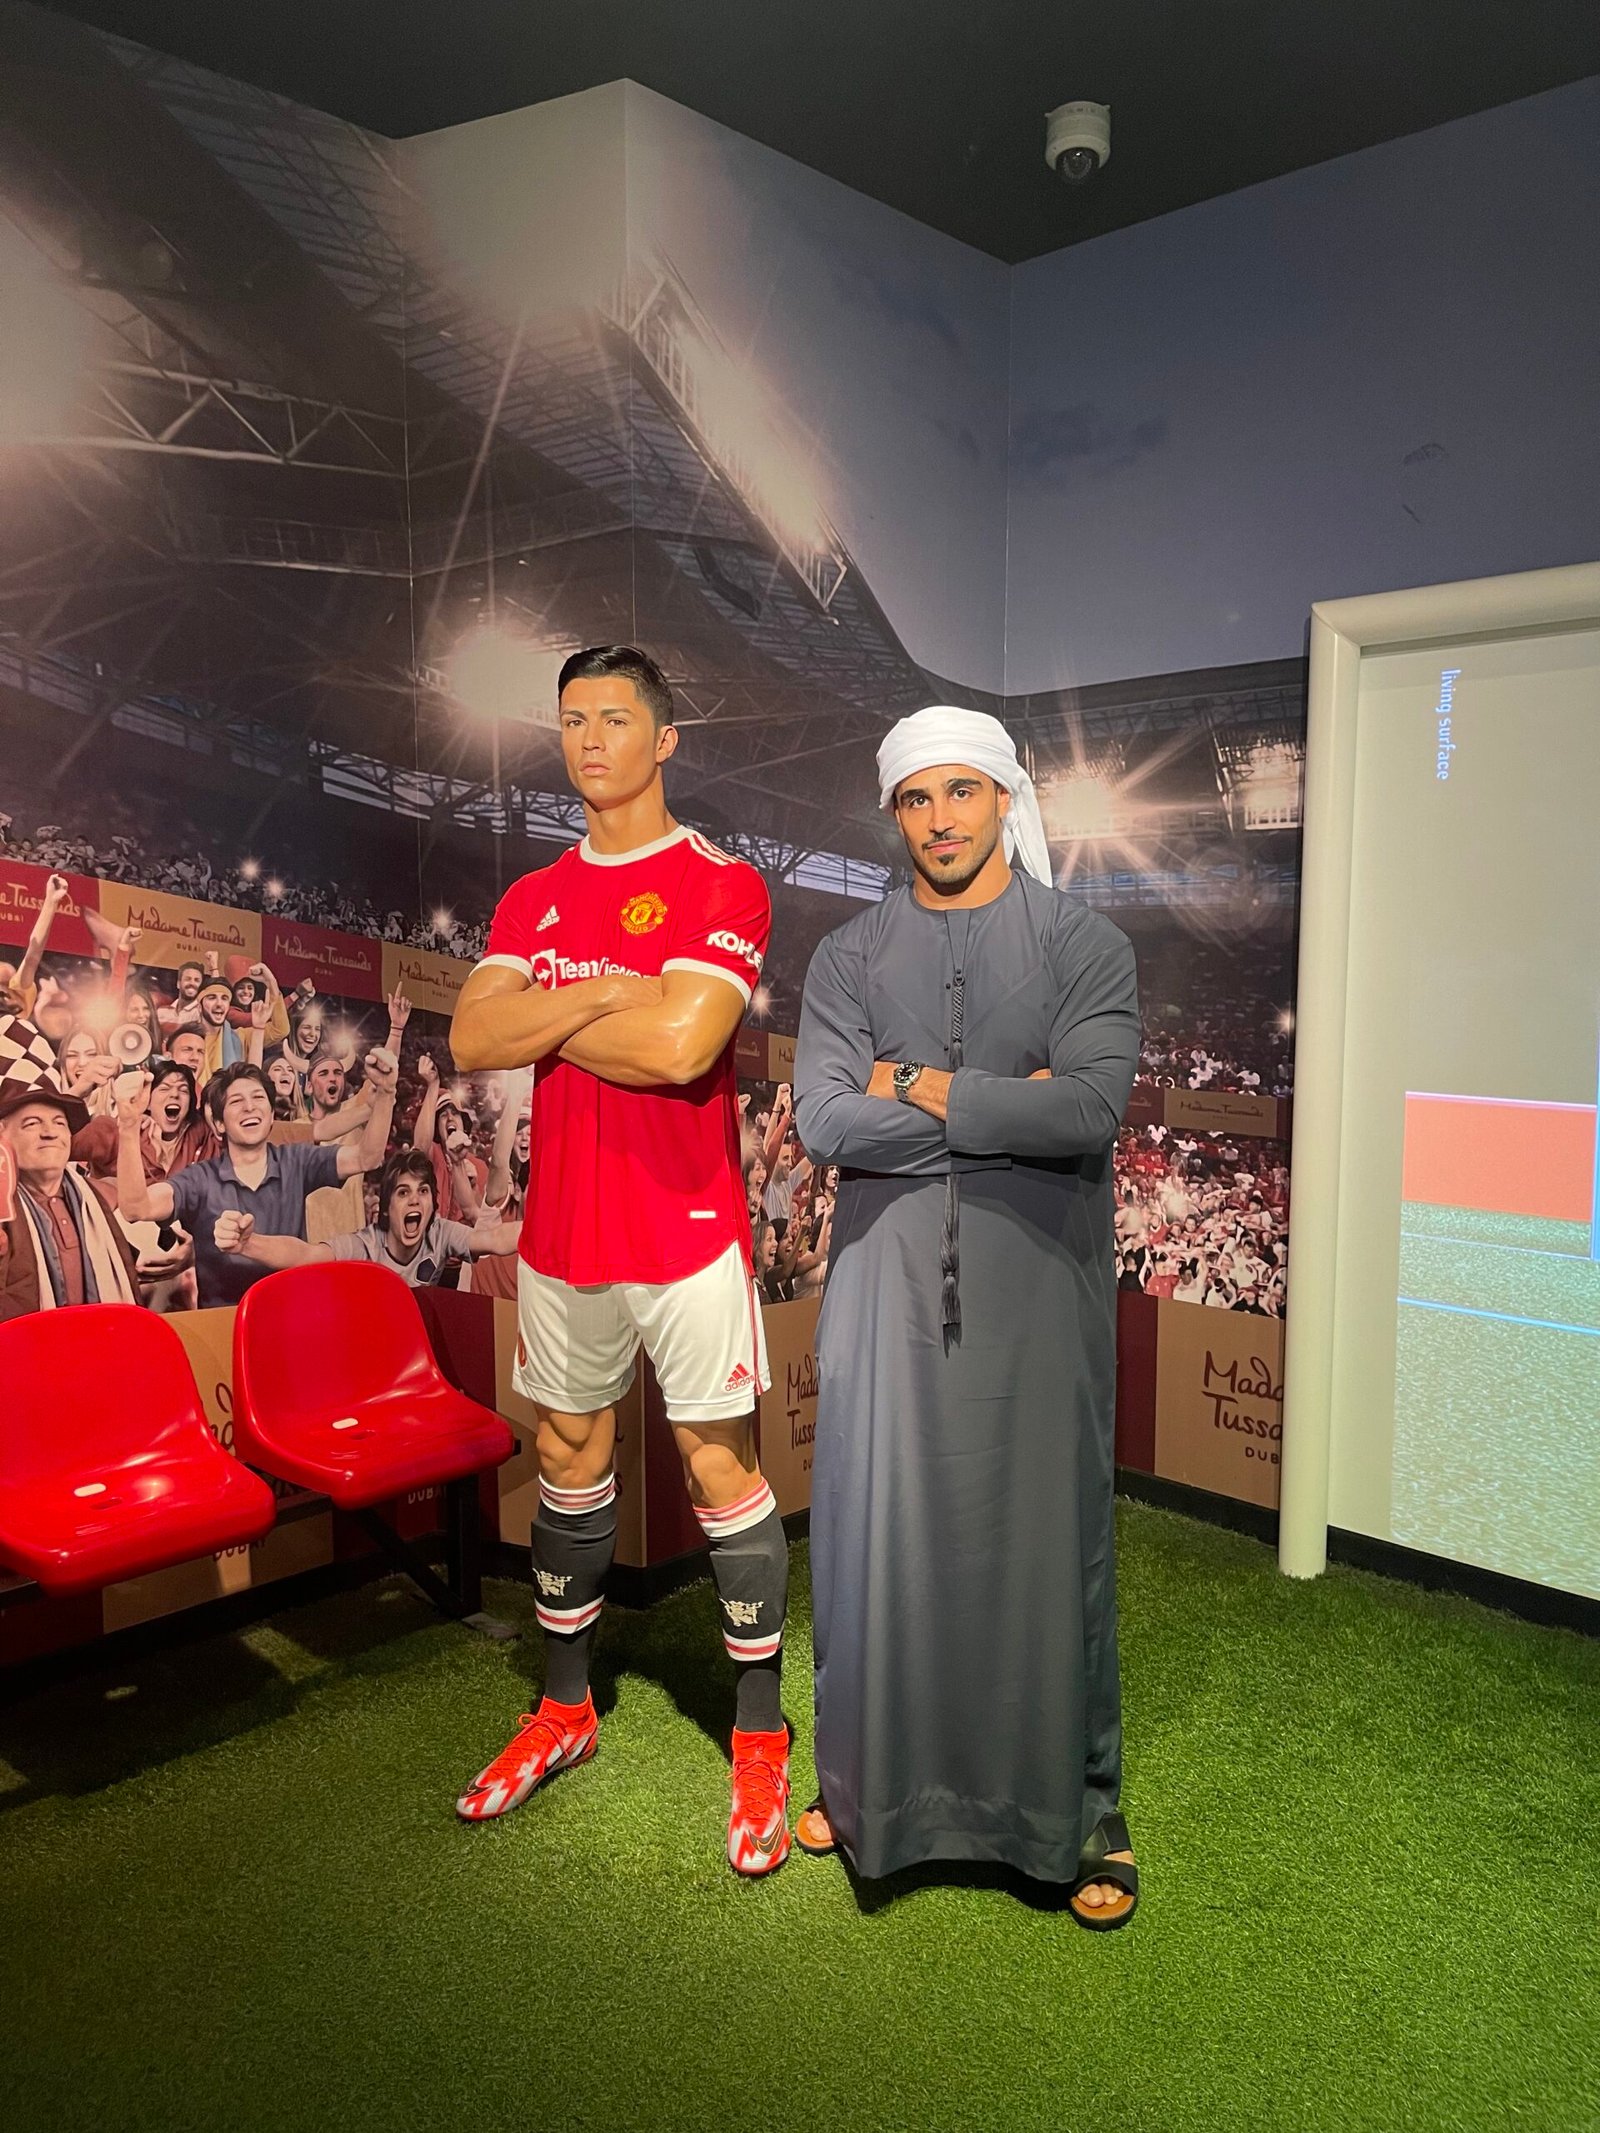 Madame Tussauds Dubai, ticket prices, bookings, information, videos, images, and more